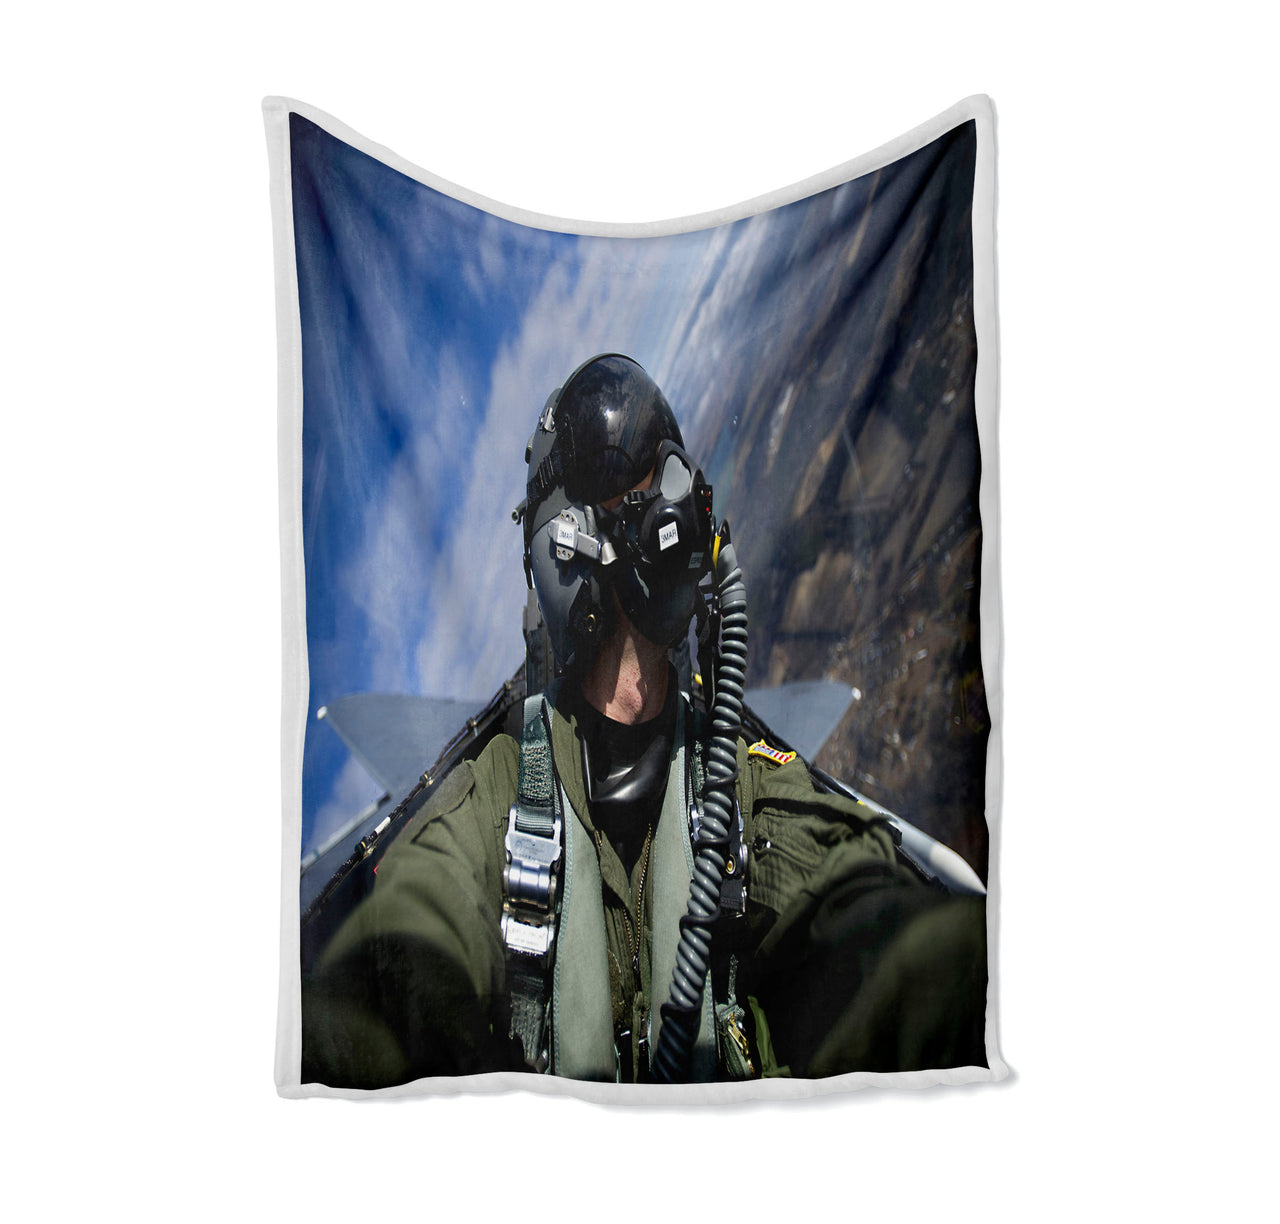 Amazing Military Pilot Selfie Designed Bed Blankets & Covers